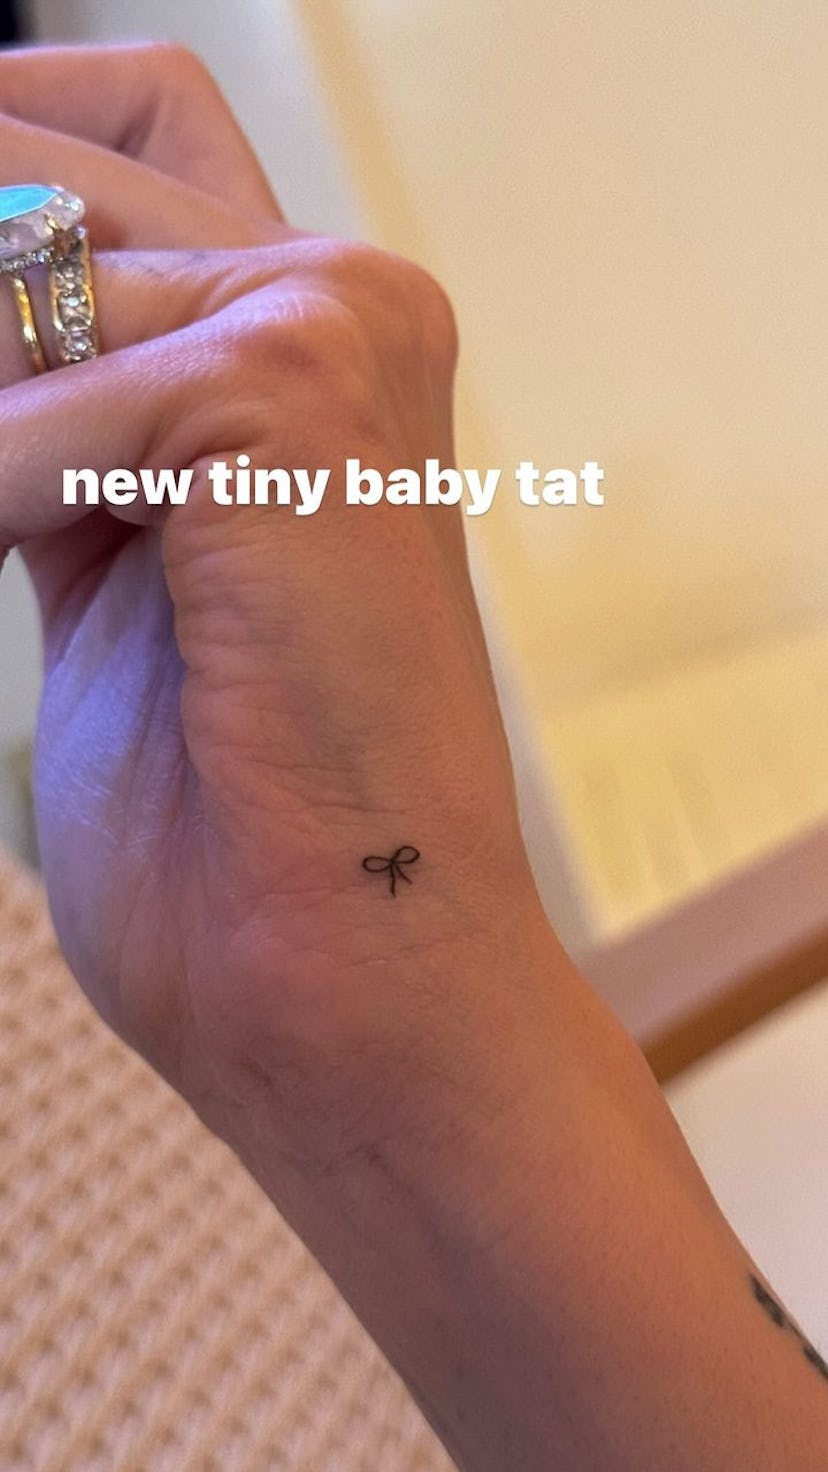 On Dec. 20, 2023, Hailey Bieber shared her new fine line micro bow tattoo on Instagram stories.